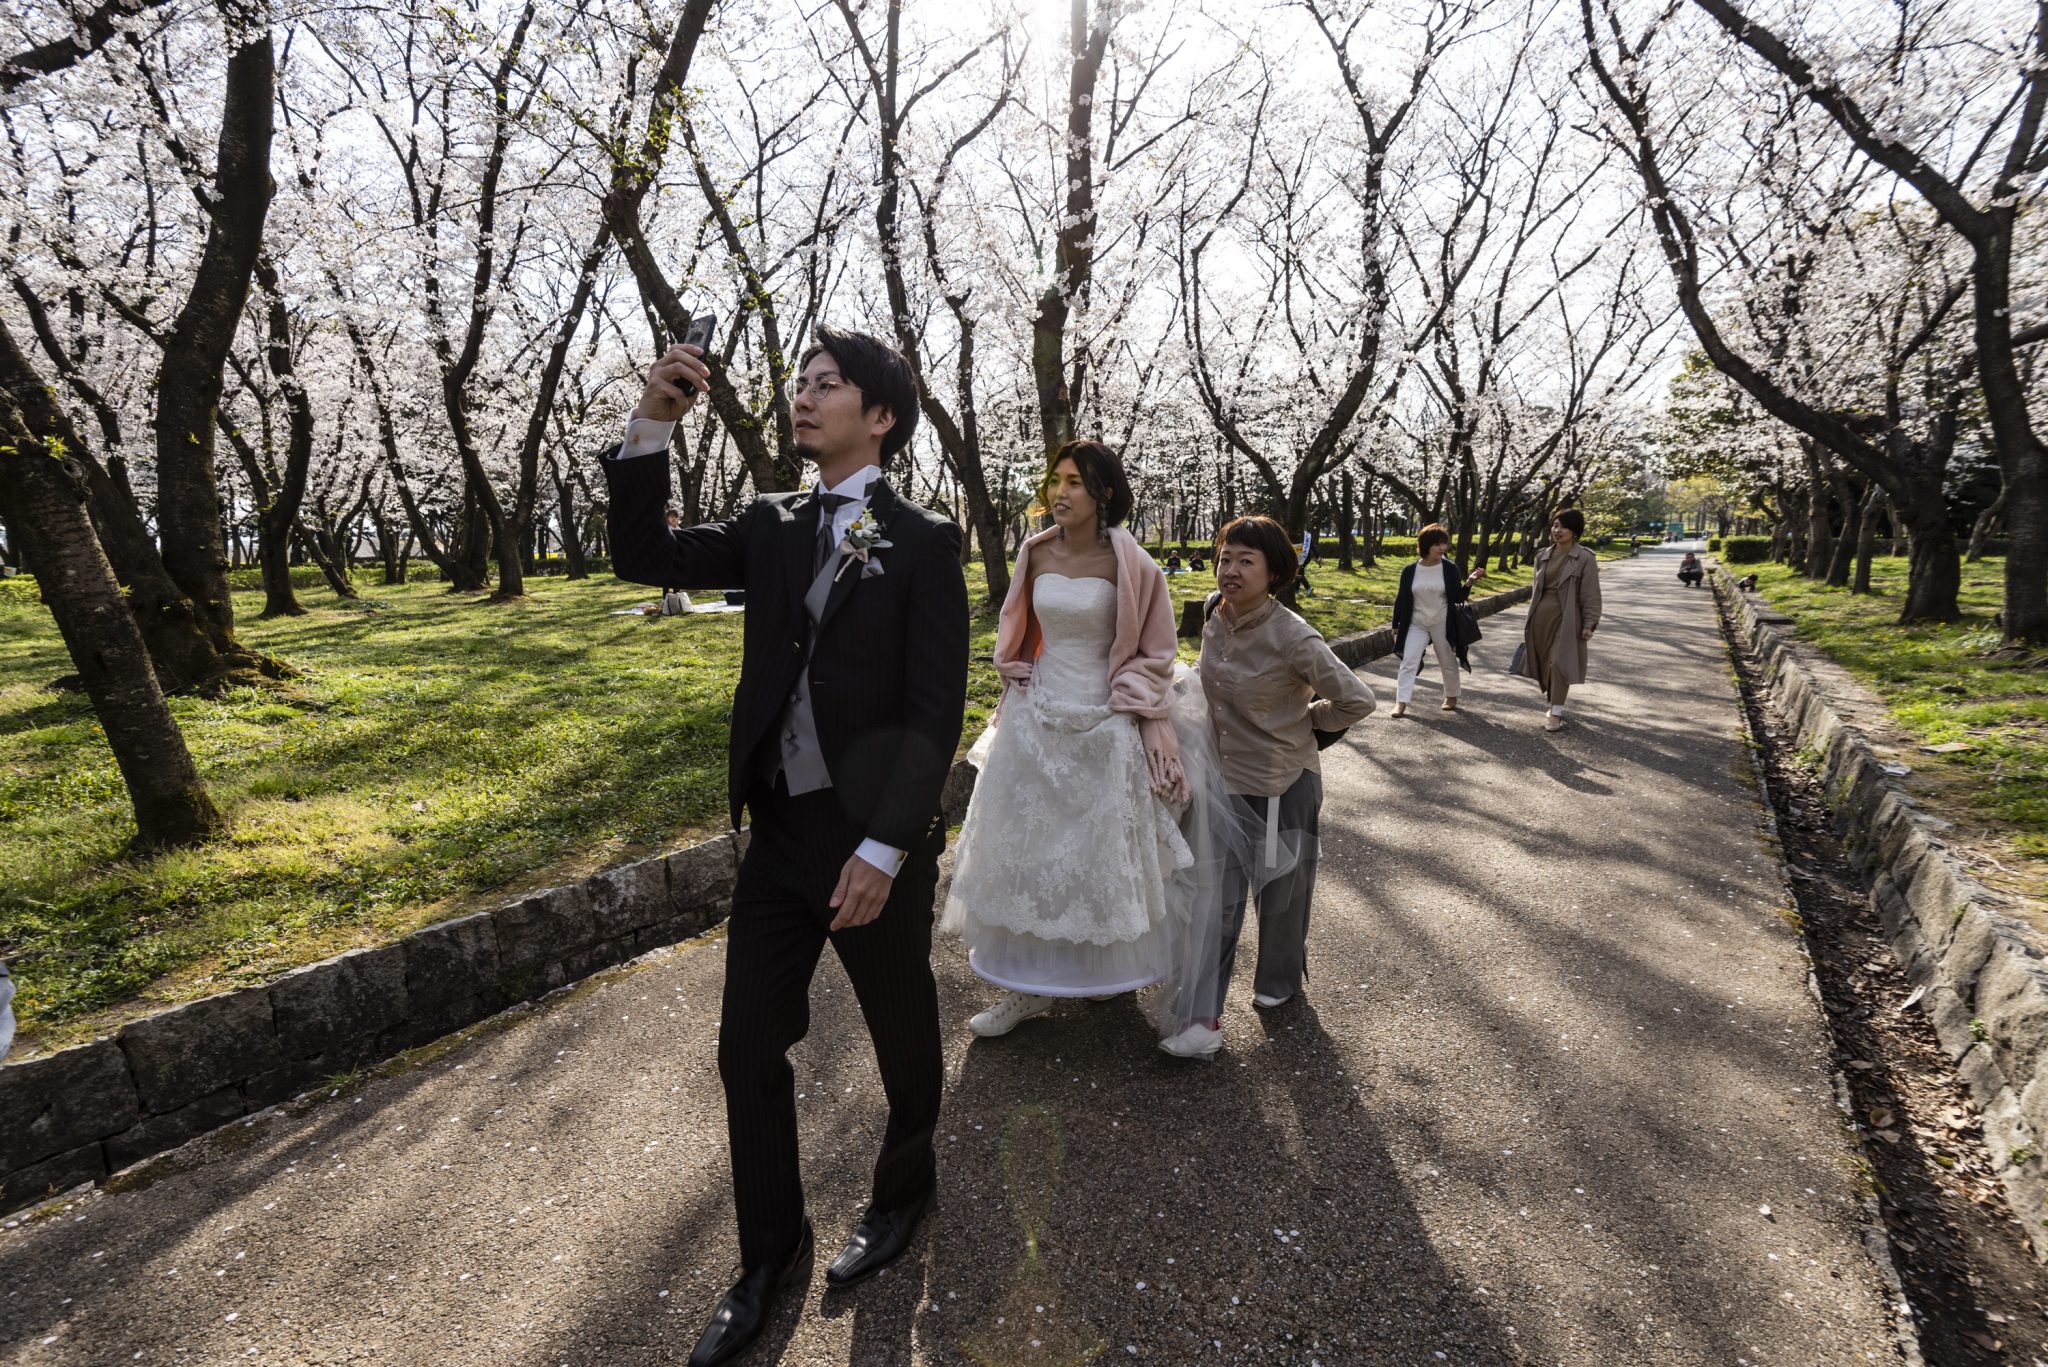 Japanese family law must change